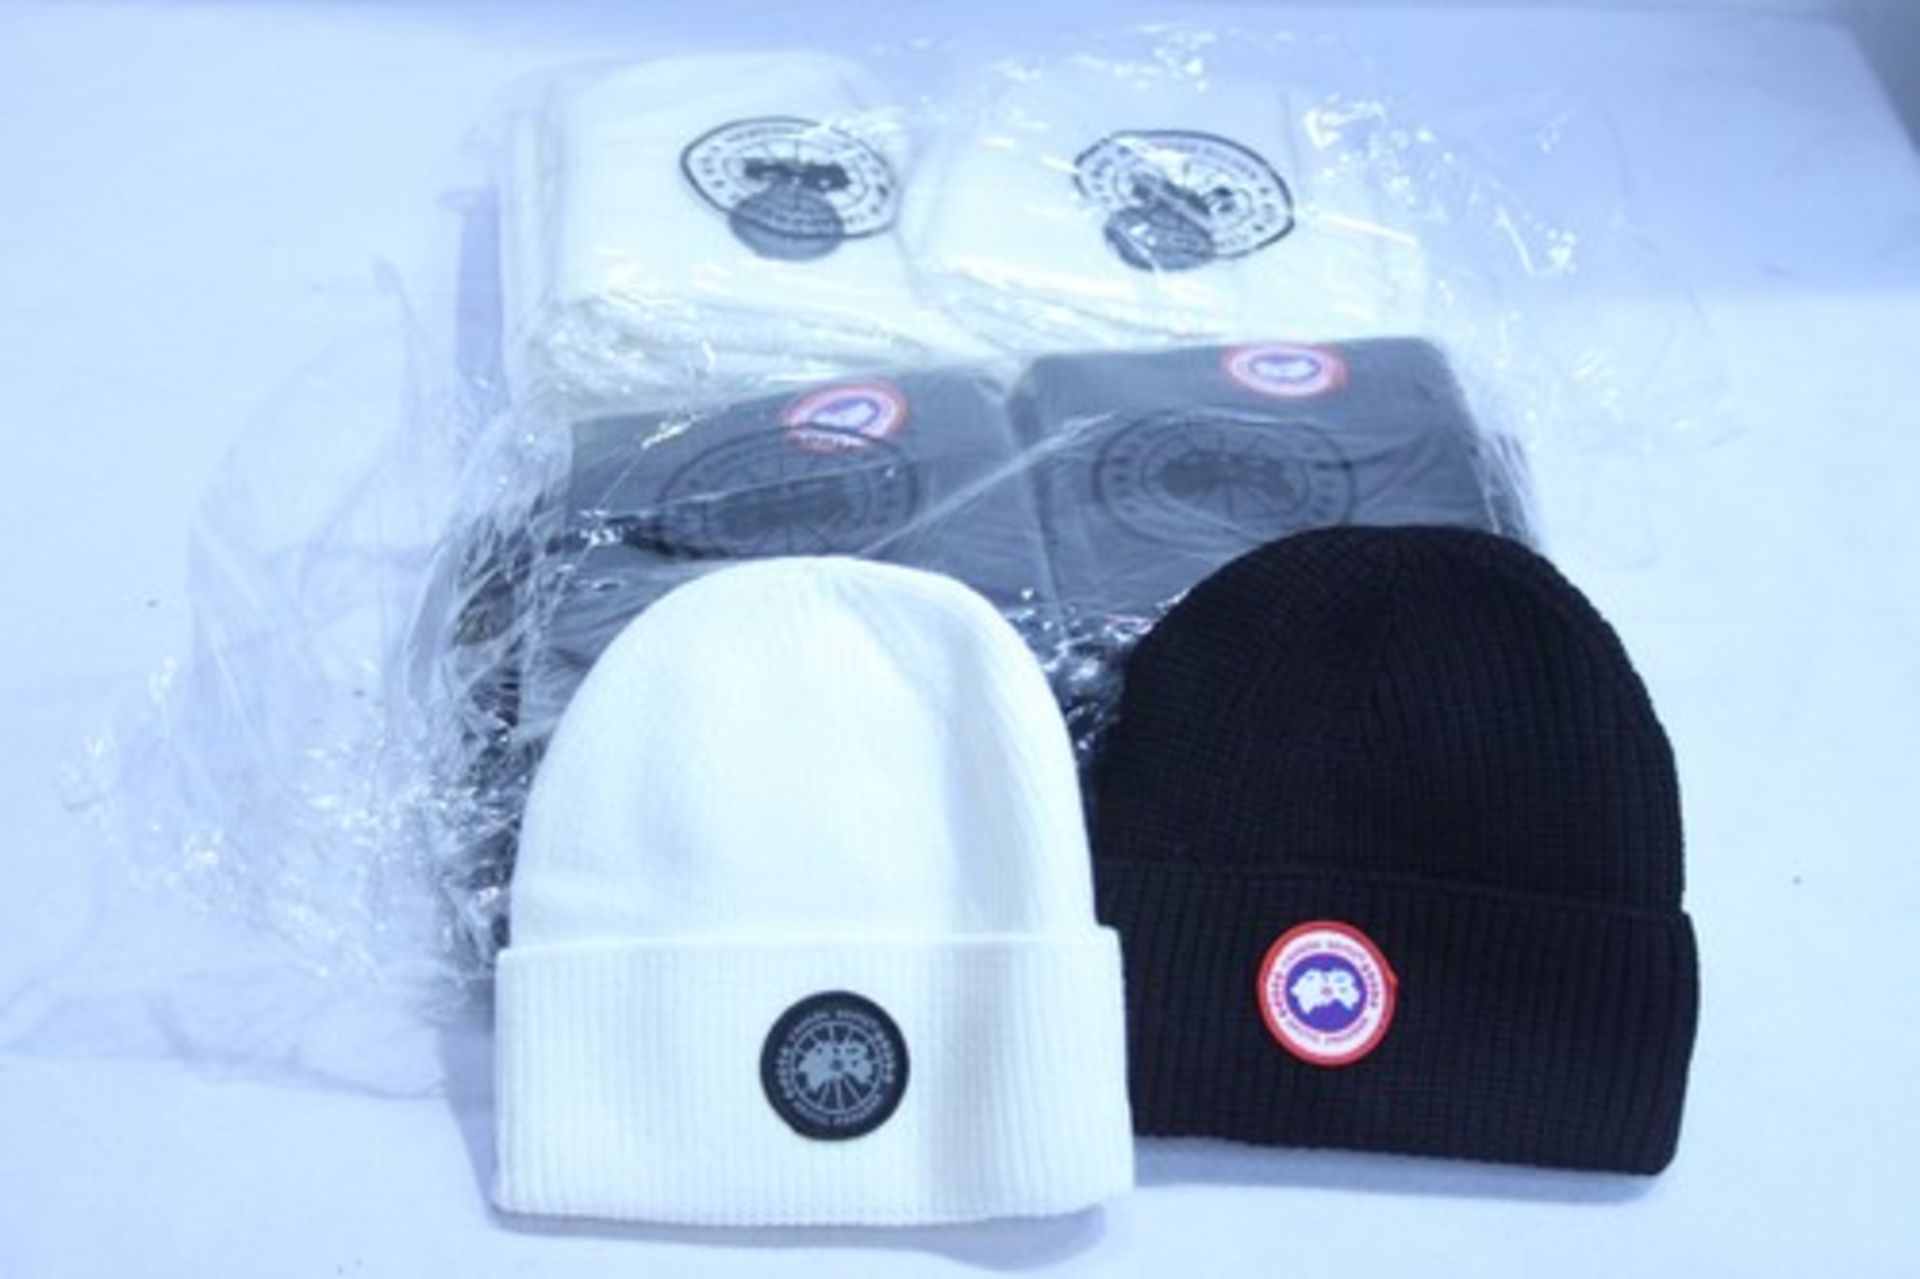 Approximately 20 x cream and black beanie hats -new with tags (E4B)